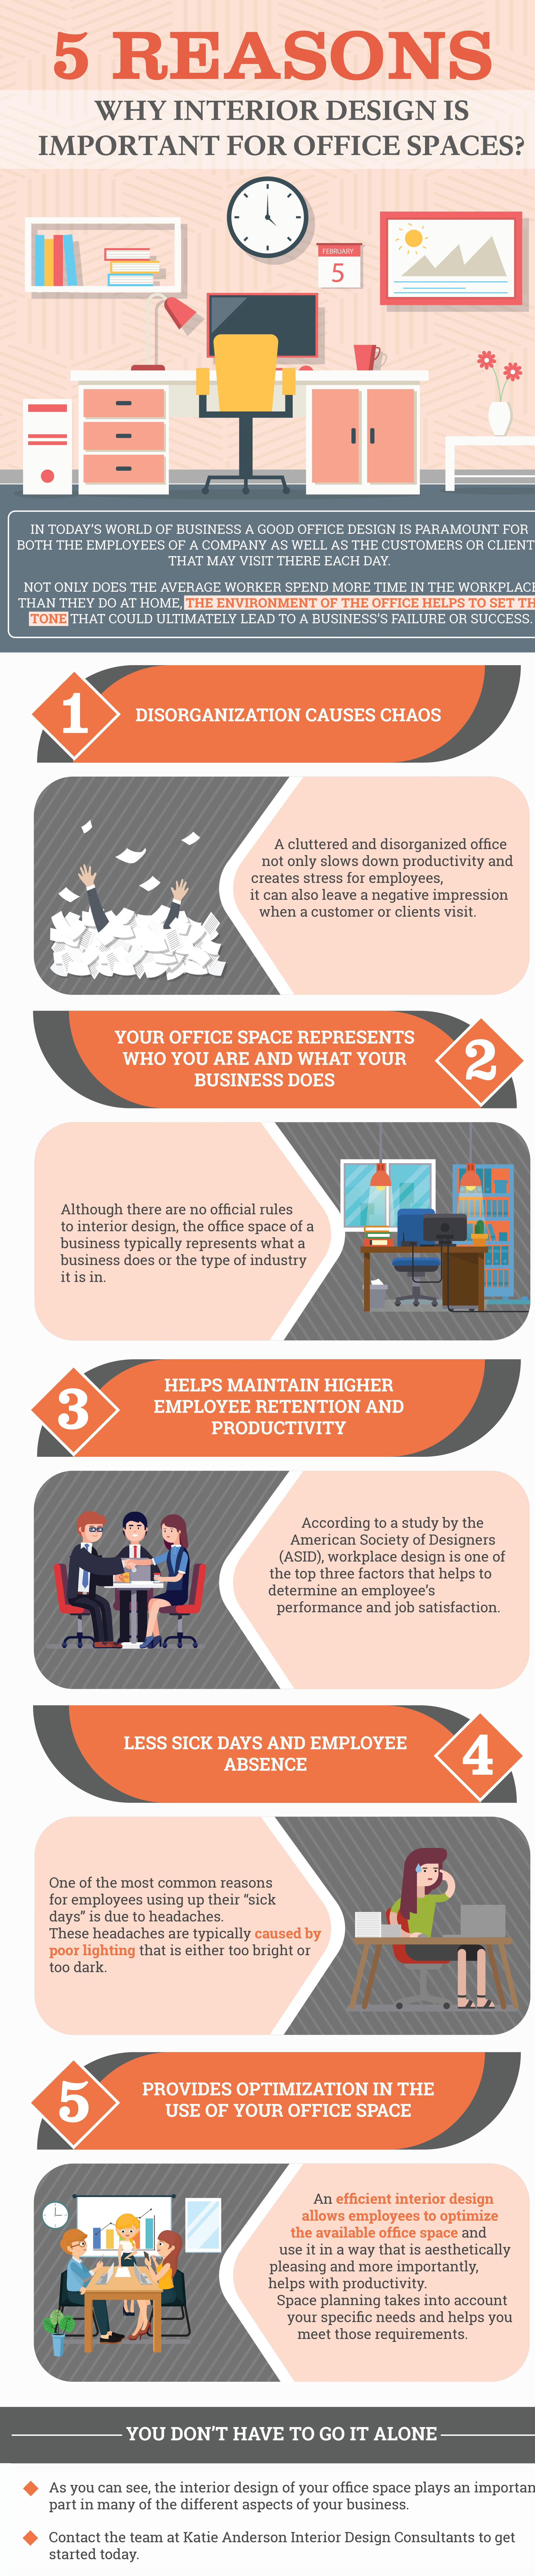 infographic-5-reasons-why-interior-design-important-office-spaces-katie-anderson